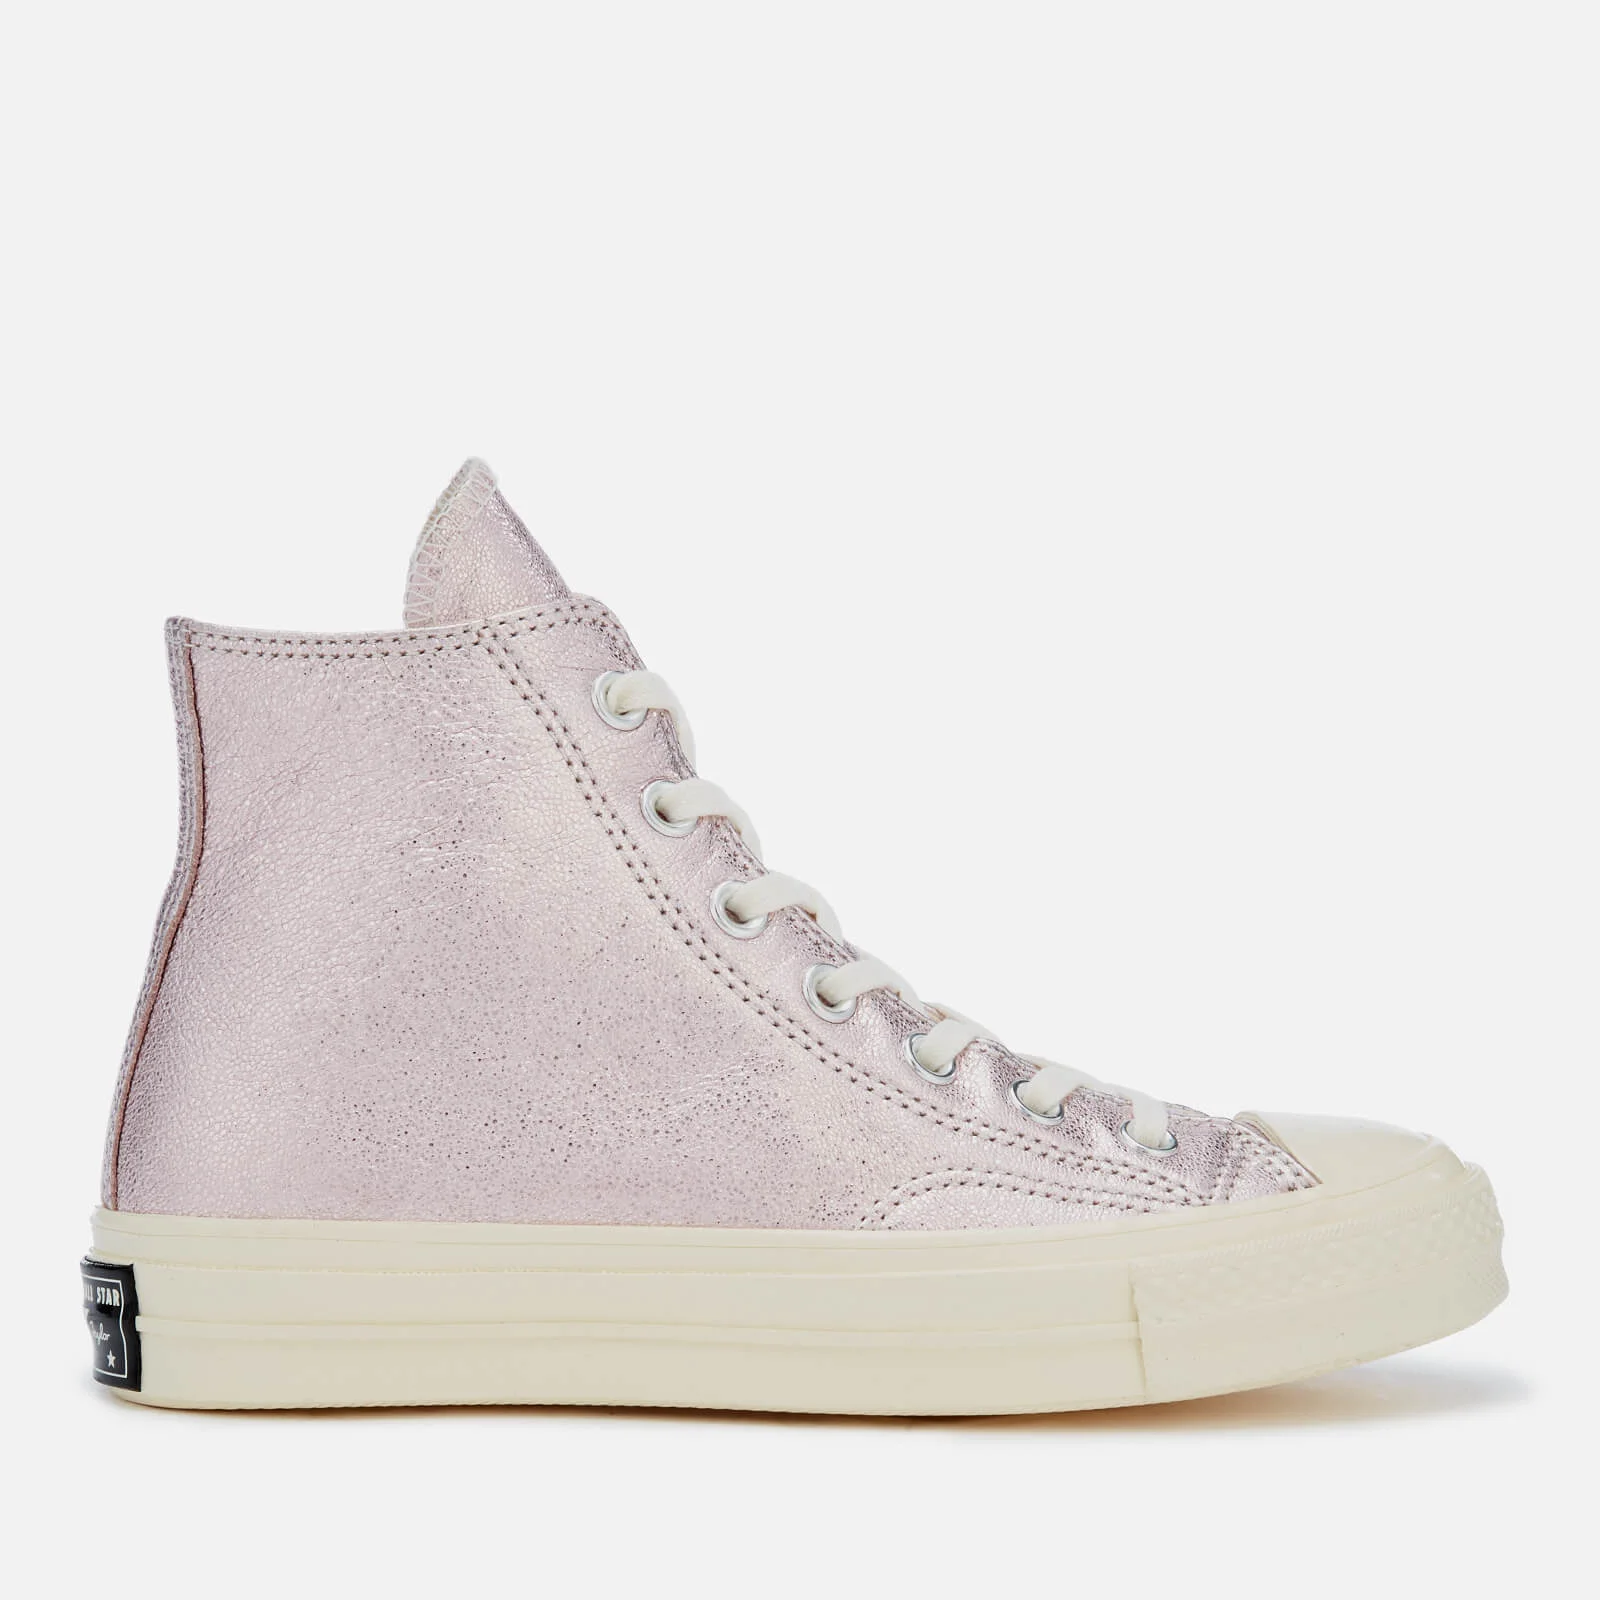 Converse Women's Chuck Taylor All Star '70 Hi-Top Trainers - Rust Pink/Egret Image 1